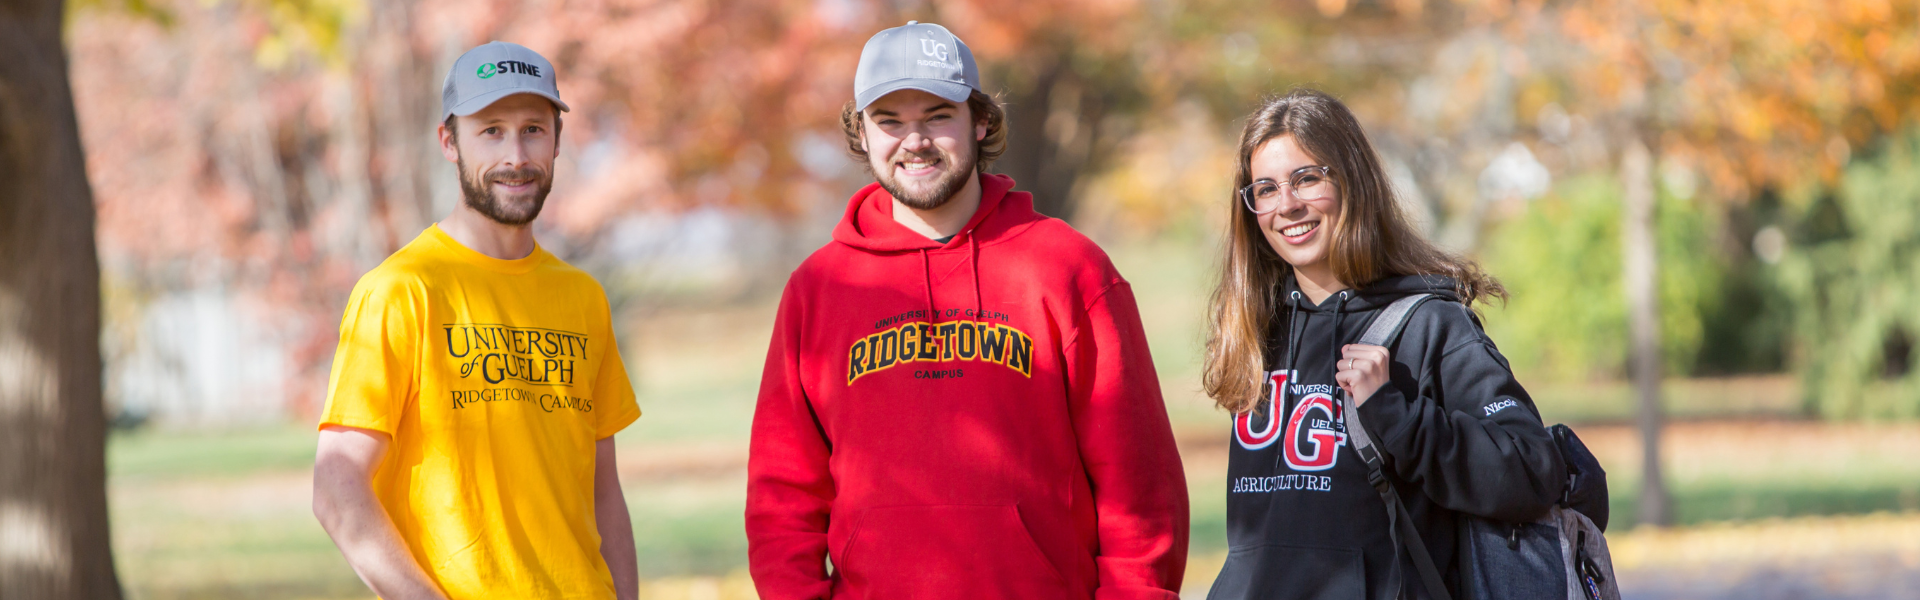 Welcome to Ridgetown Campus! Image of the Ridgetown Campus Student